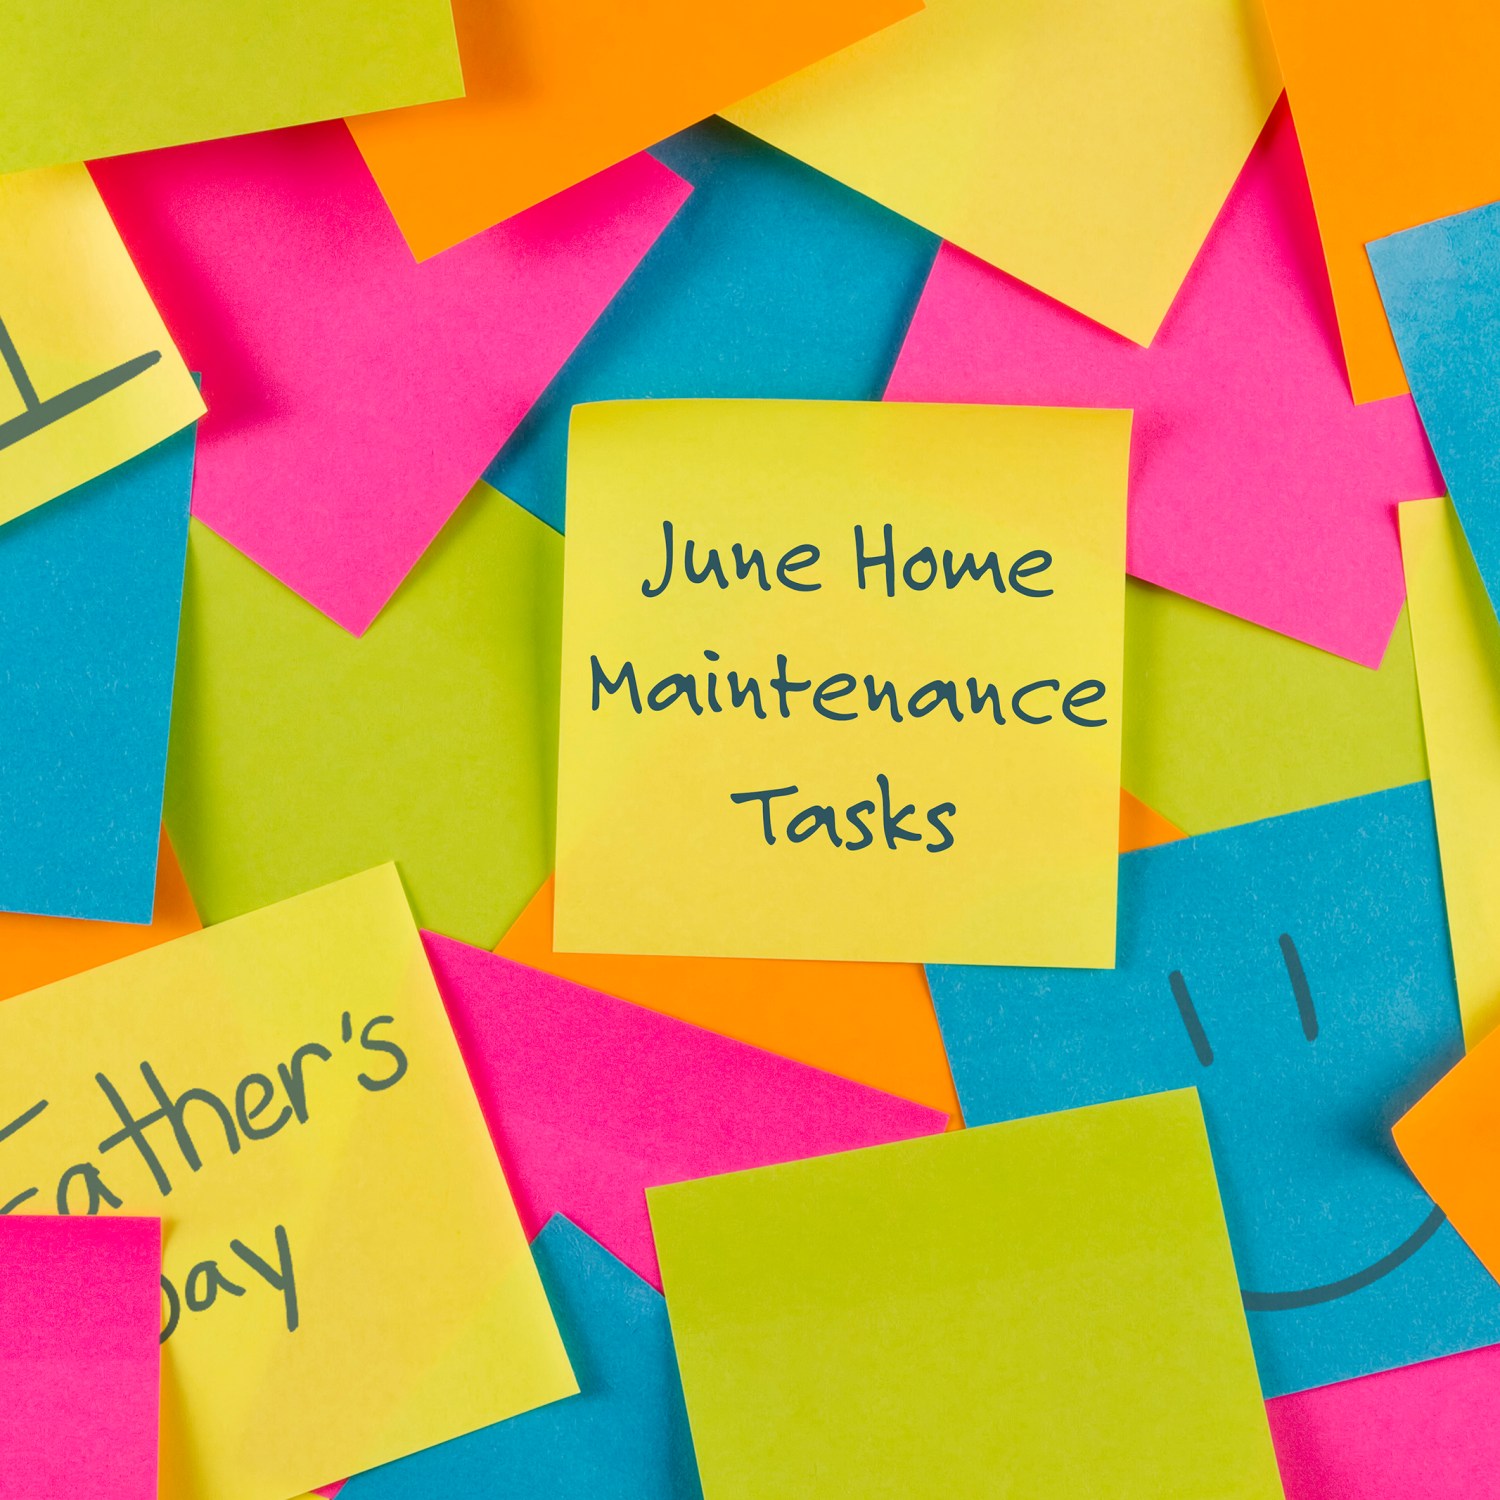 June-Home-Maintenance-to-do-now-fathers-day-post-it-notes